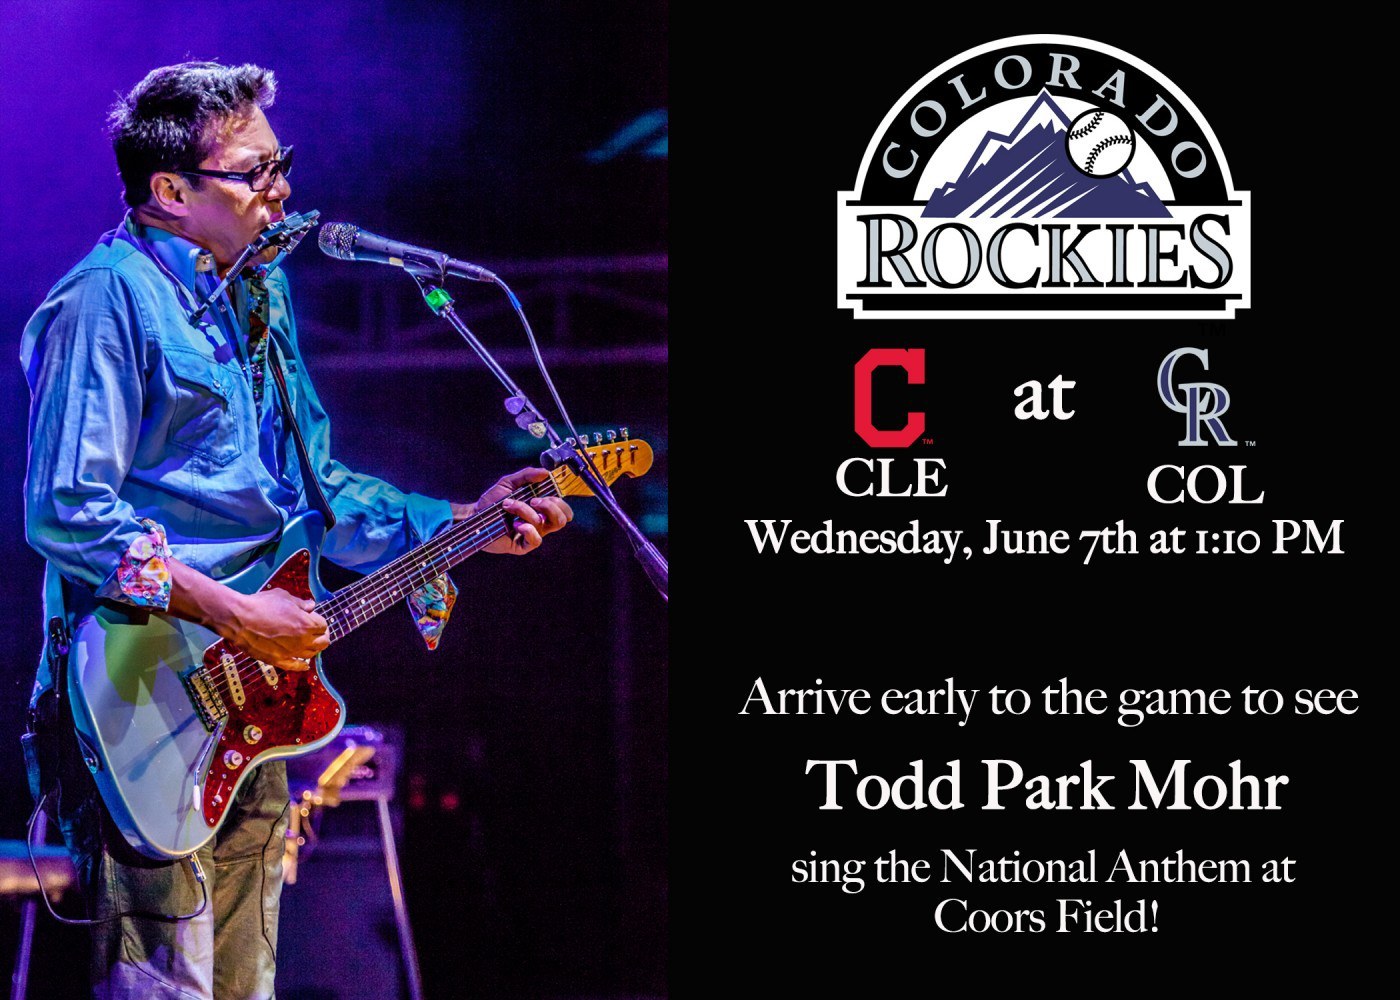 Todd Park Mohr singing the national anthem at Rockies Game TOMORROW June 7th!